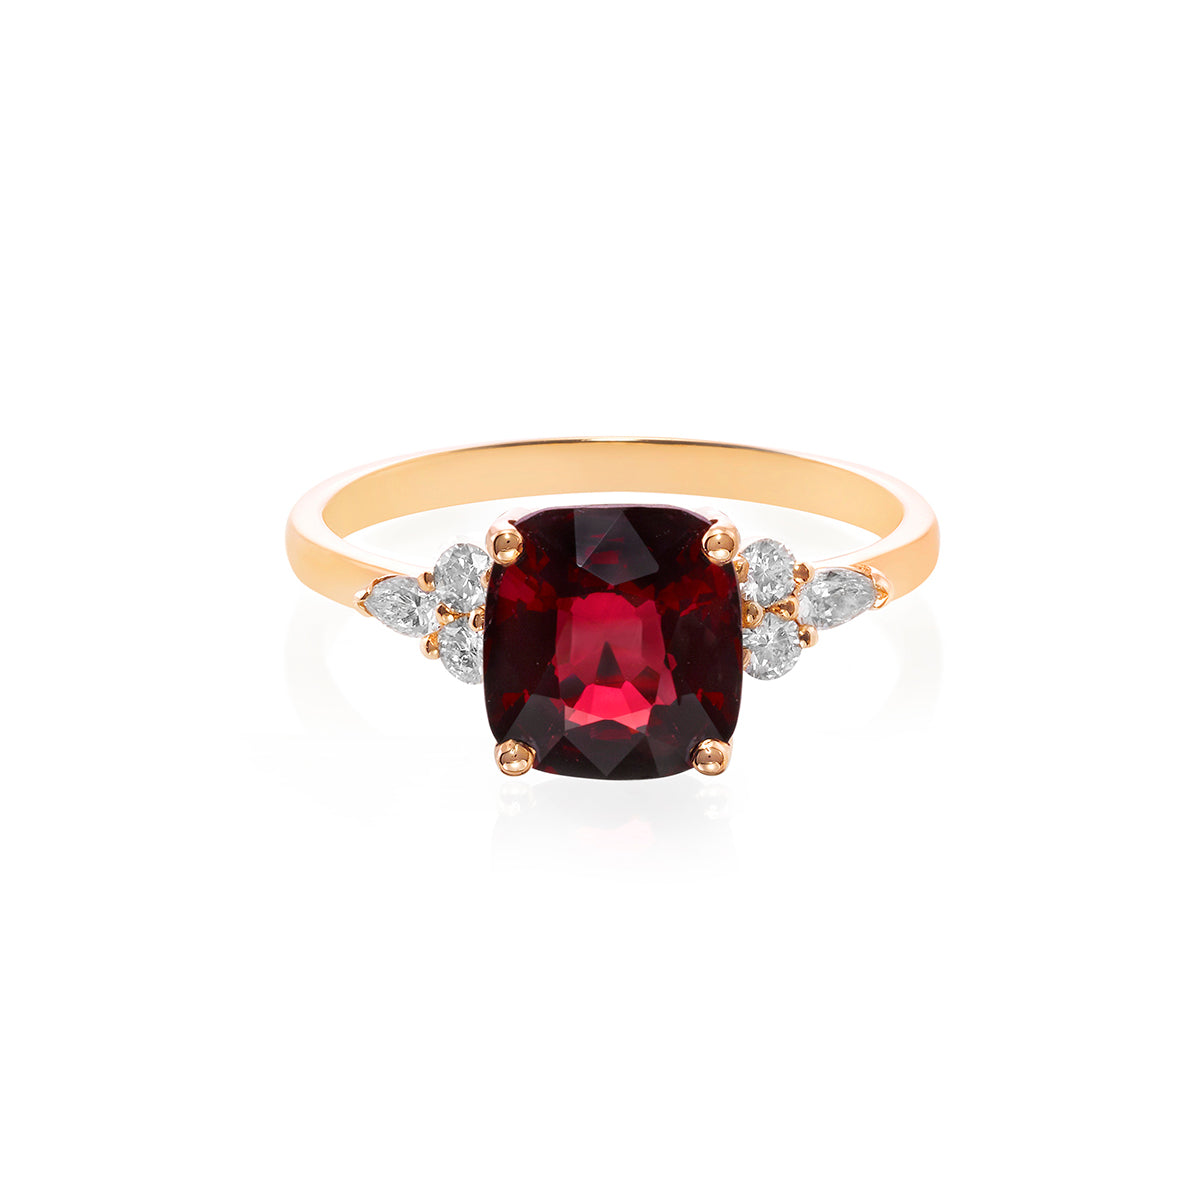 Red Spinel and Pear Diamond Ring - HN JEWELRY